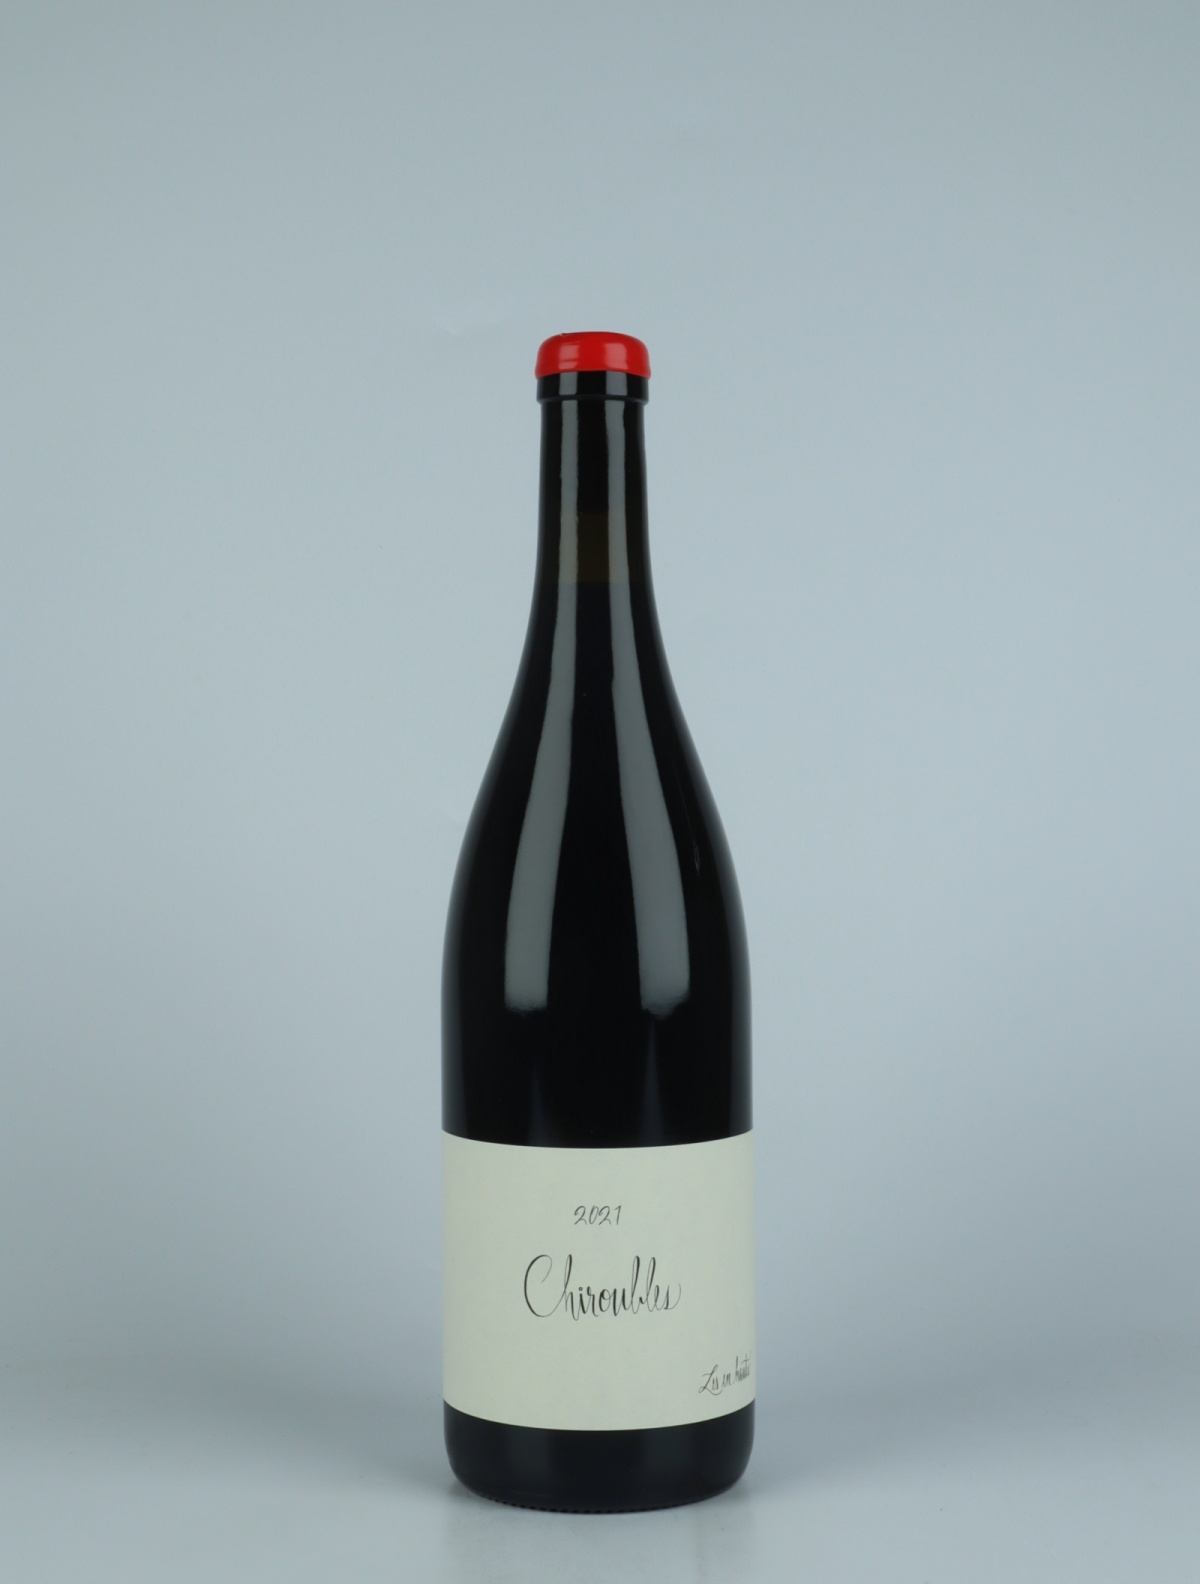 A bottle 2021 Chiroubles Red wine from Les En Hauts, Beaujolais in France